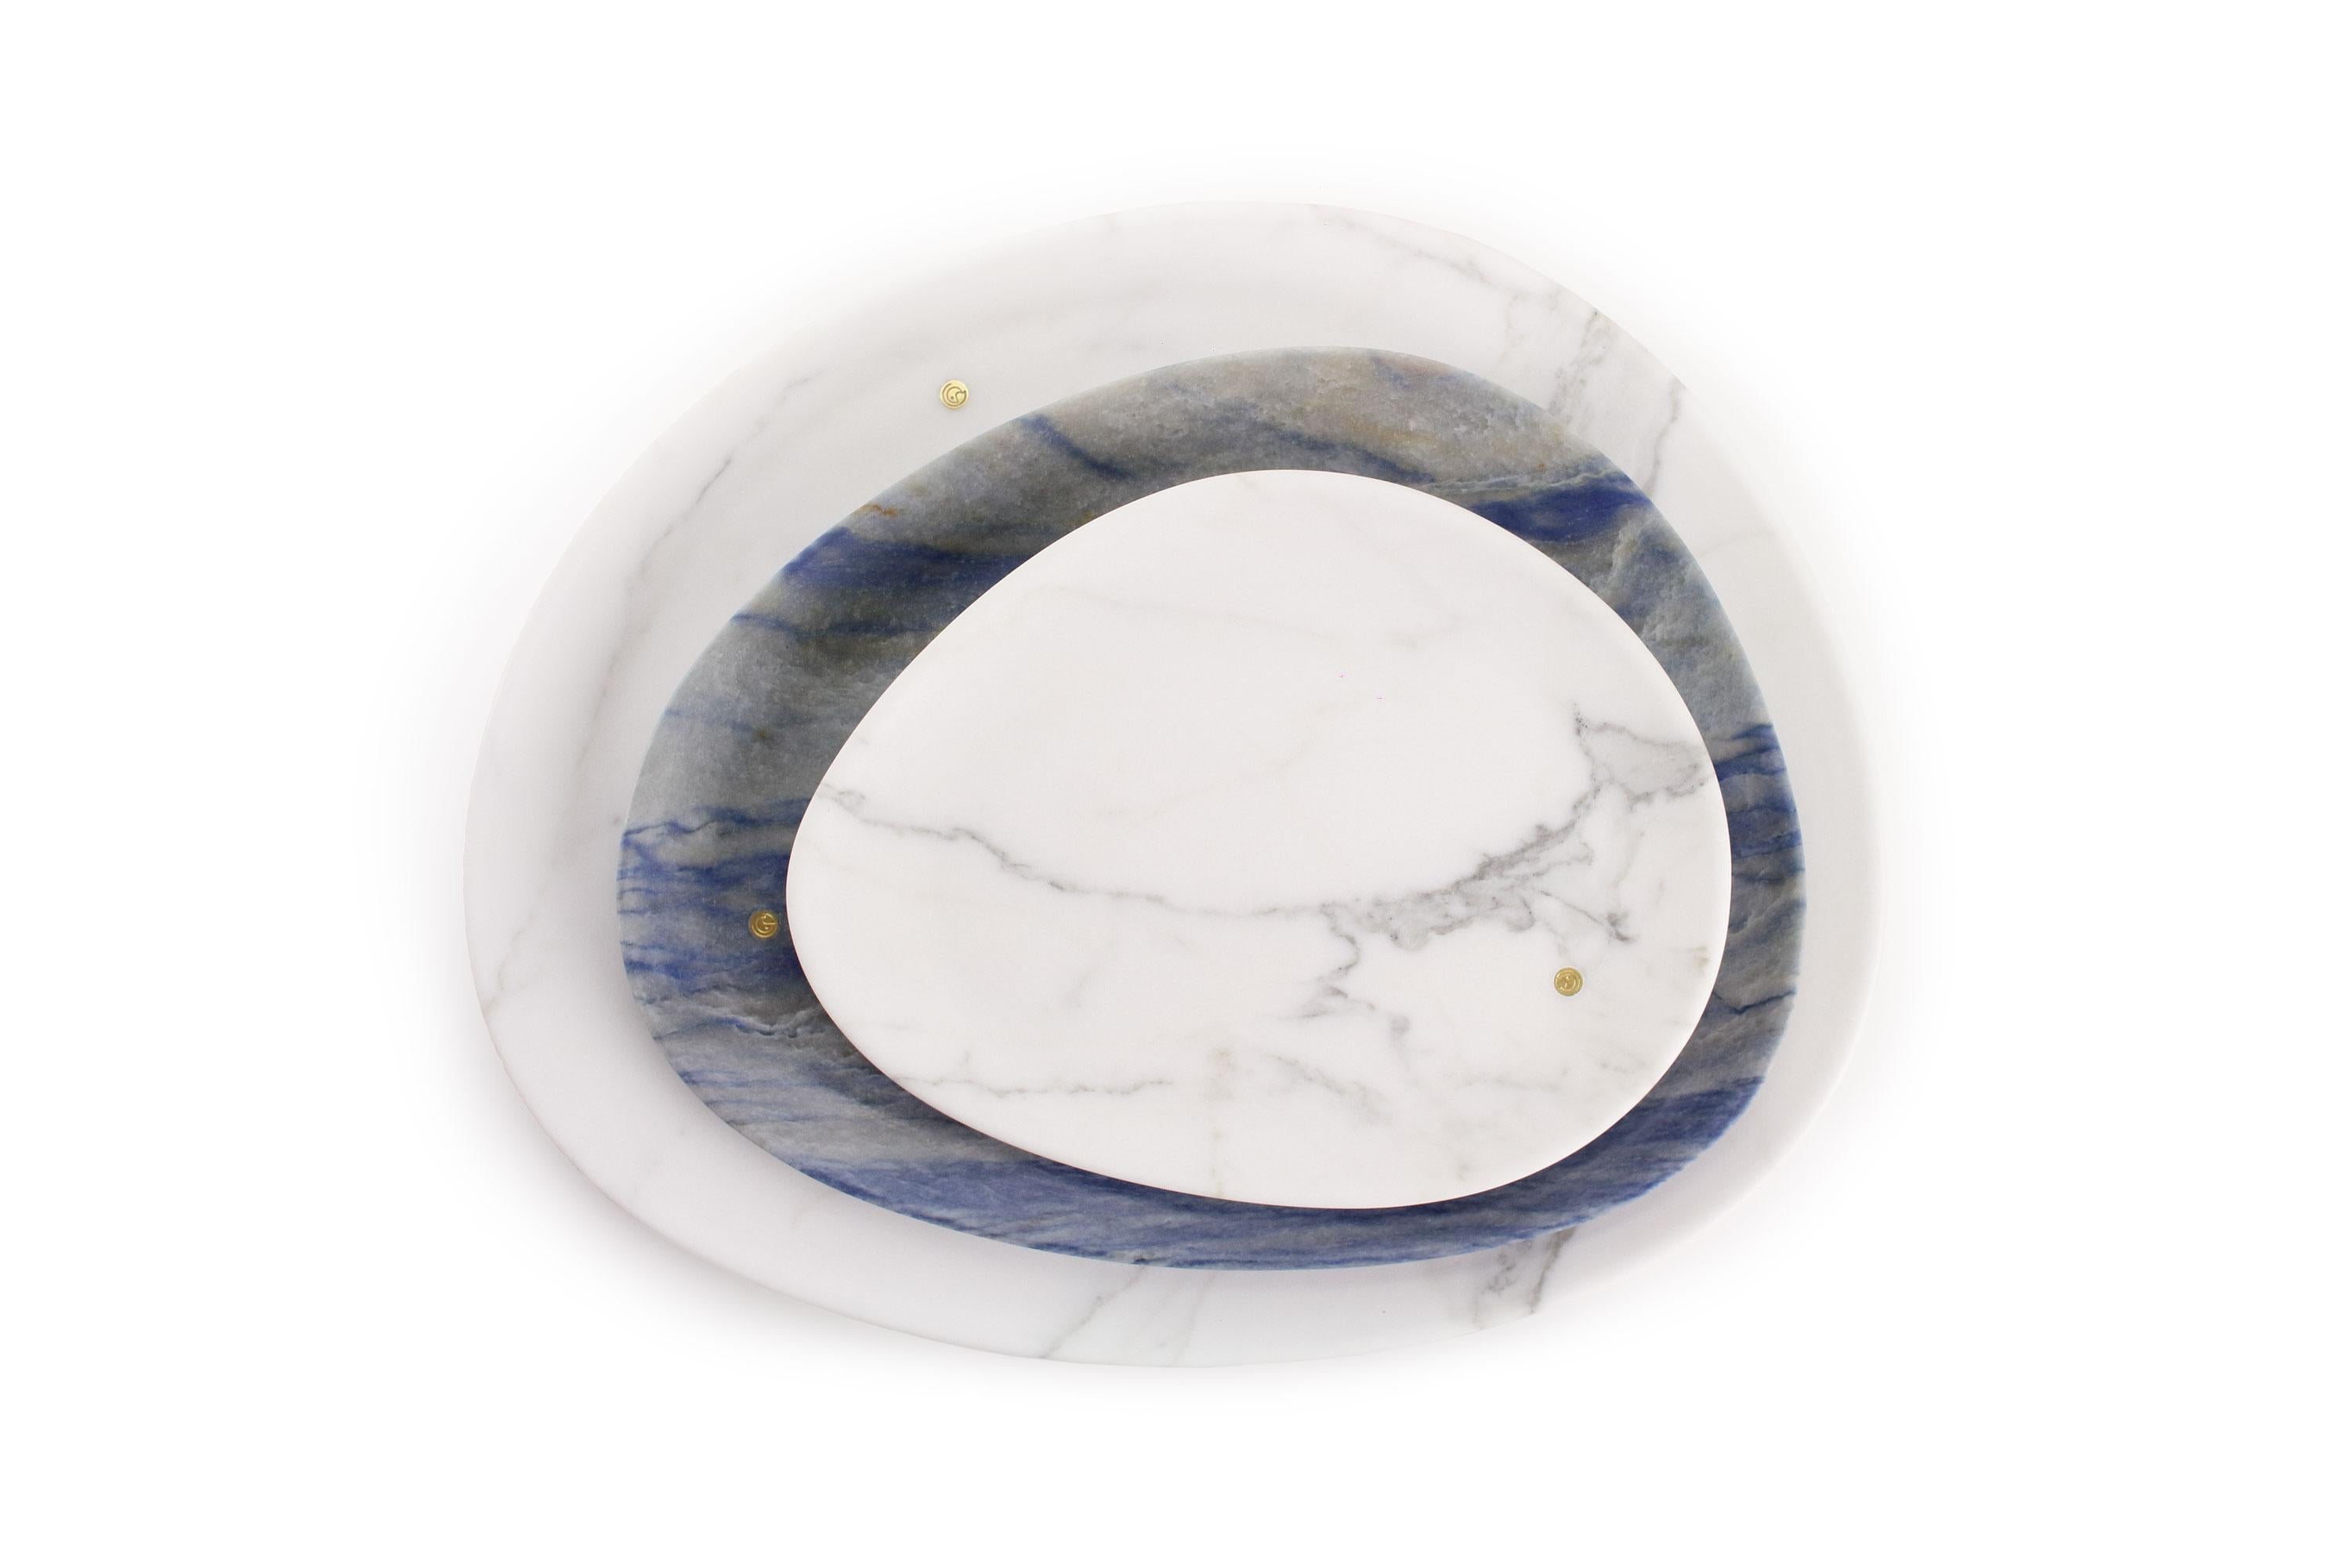 Hand carved presentation plates in Azul Macaubas Quartzite and Statuary marble. 
Multiple use as plates, platters and placers. 

Dimensions: Small - L24 W20 H1.8 cm, Medium - L30 W28 H1.8 cm, Big - L36 W35 H1.8 cm.
Available in different marbles,